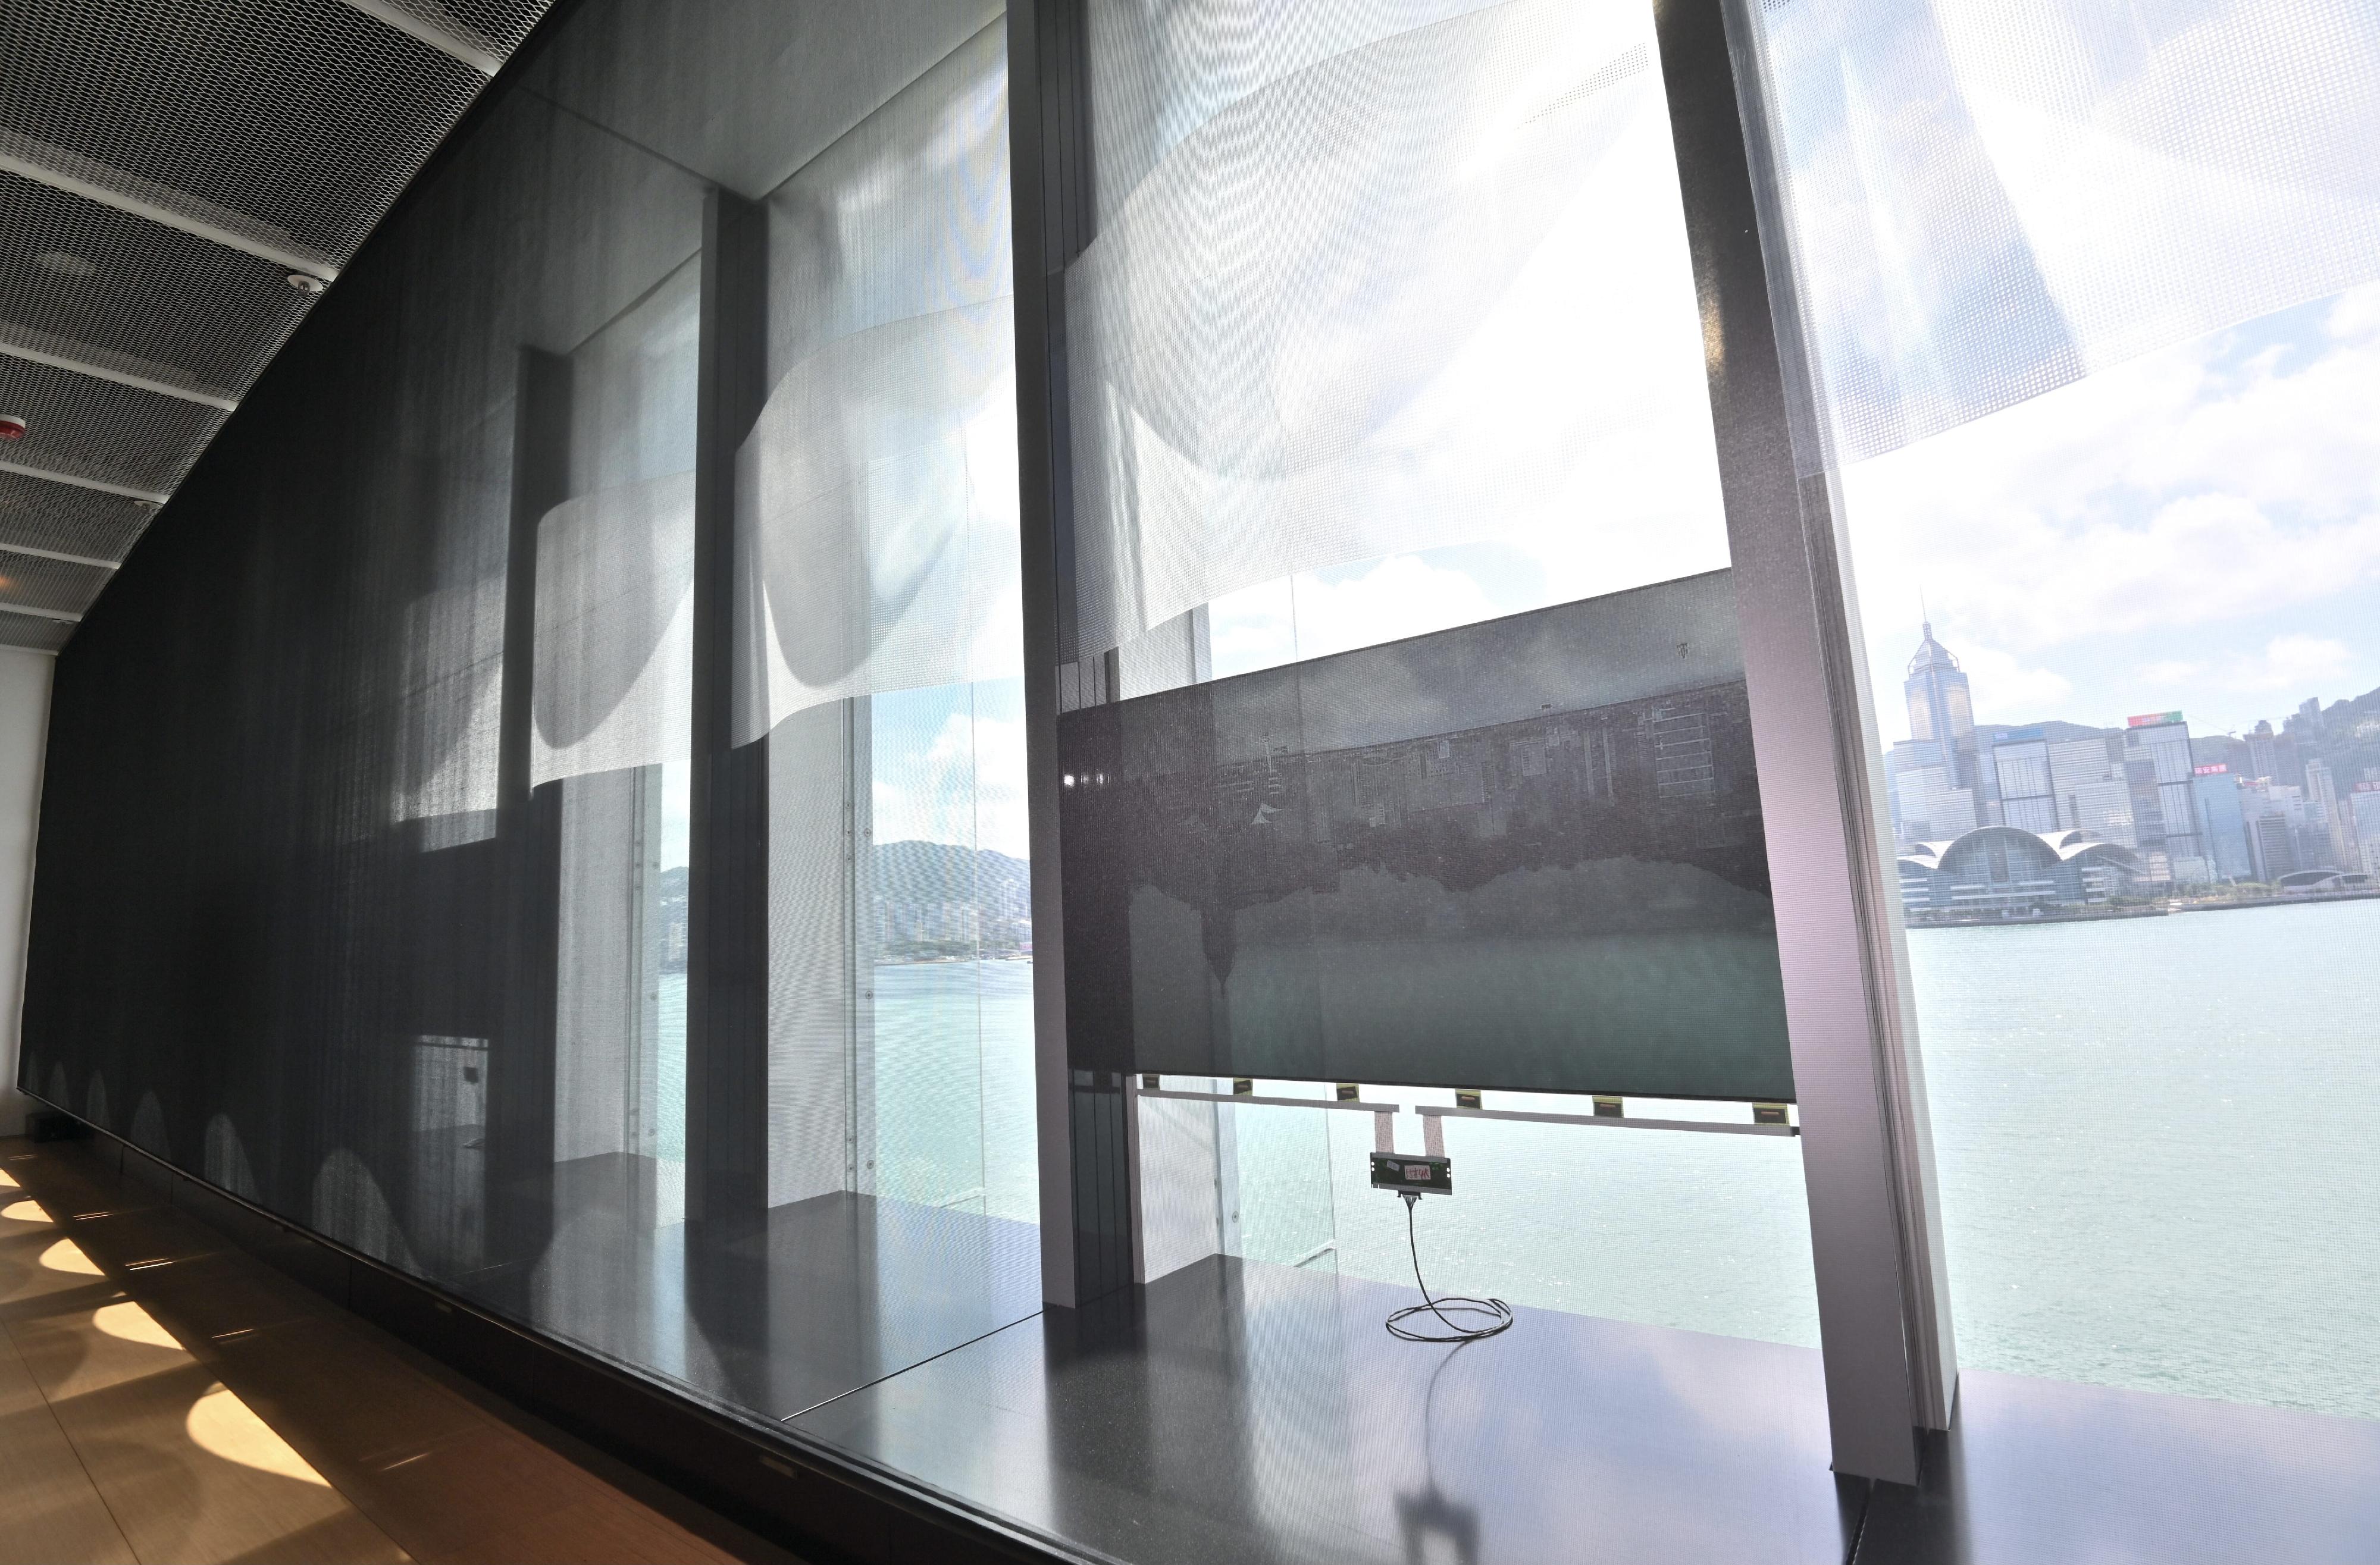 A site-specific art installation, "A 10,000-Year View", created by internationally renowned artist Zheng Chongbin, will be on display from tomorrow (October 7) on the fourth floor of the Hong Kong Museum of Art.